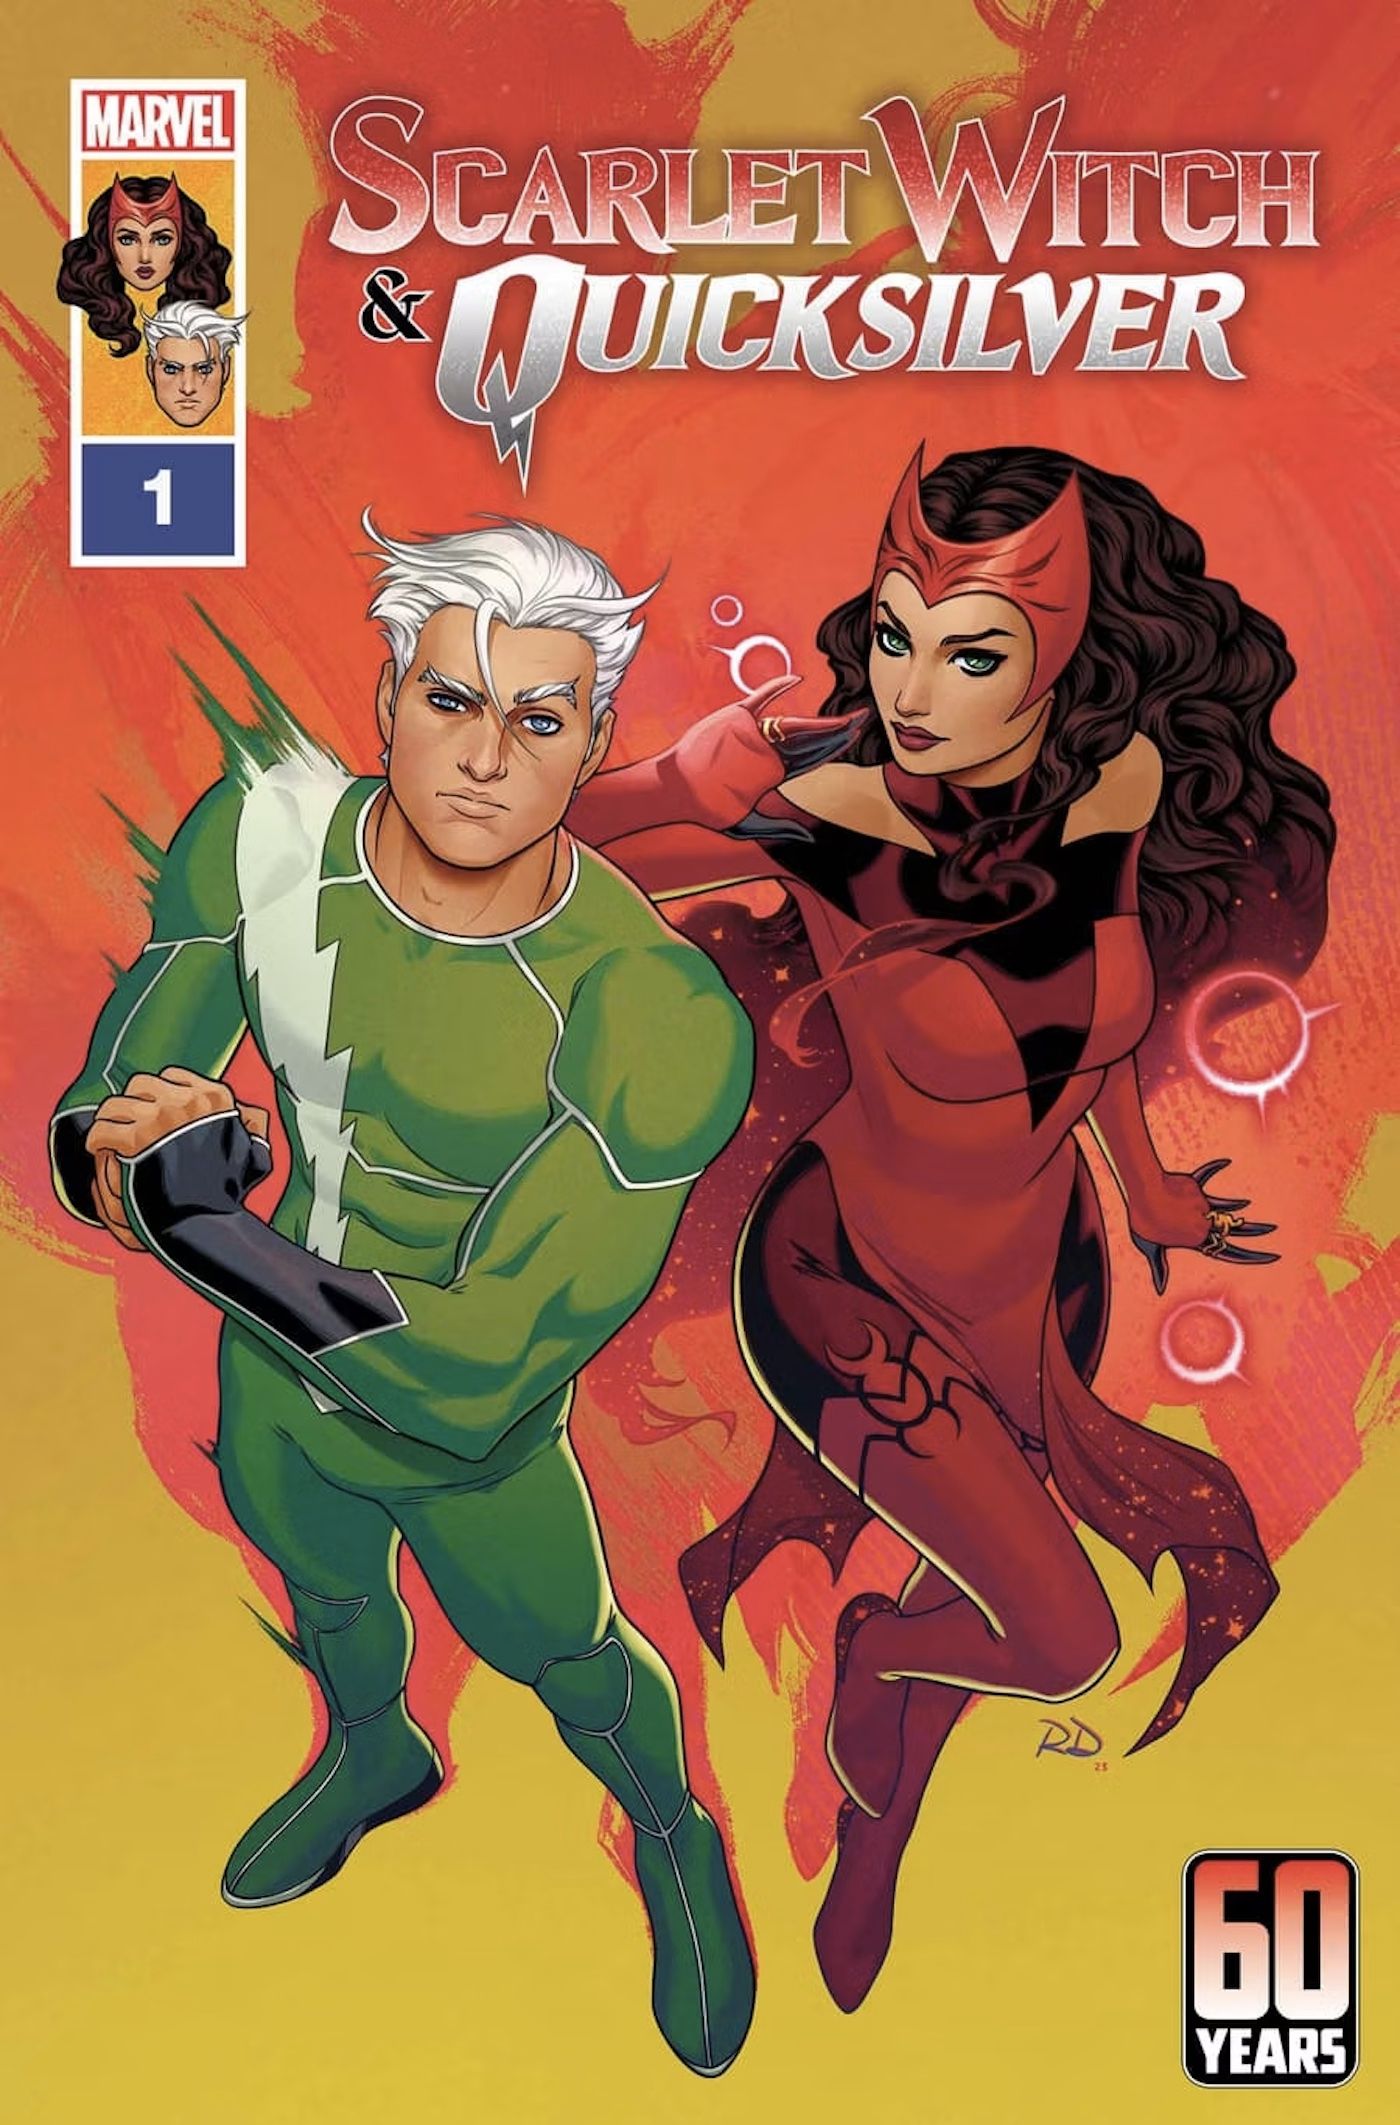 New Scarlet Witch & Quicksilver Series Reunites Marvel’s Premier Super-Siblings